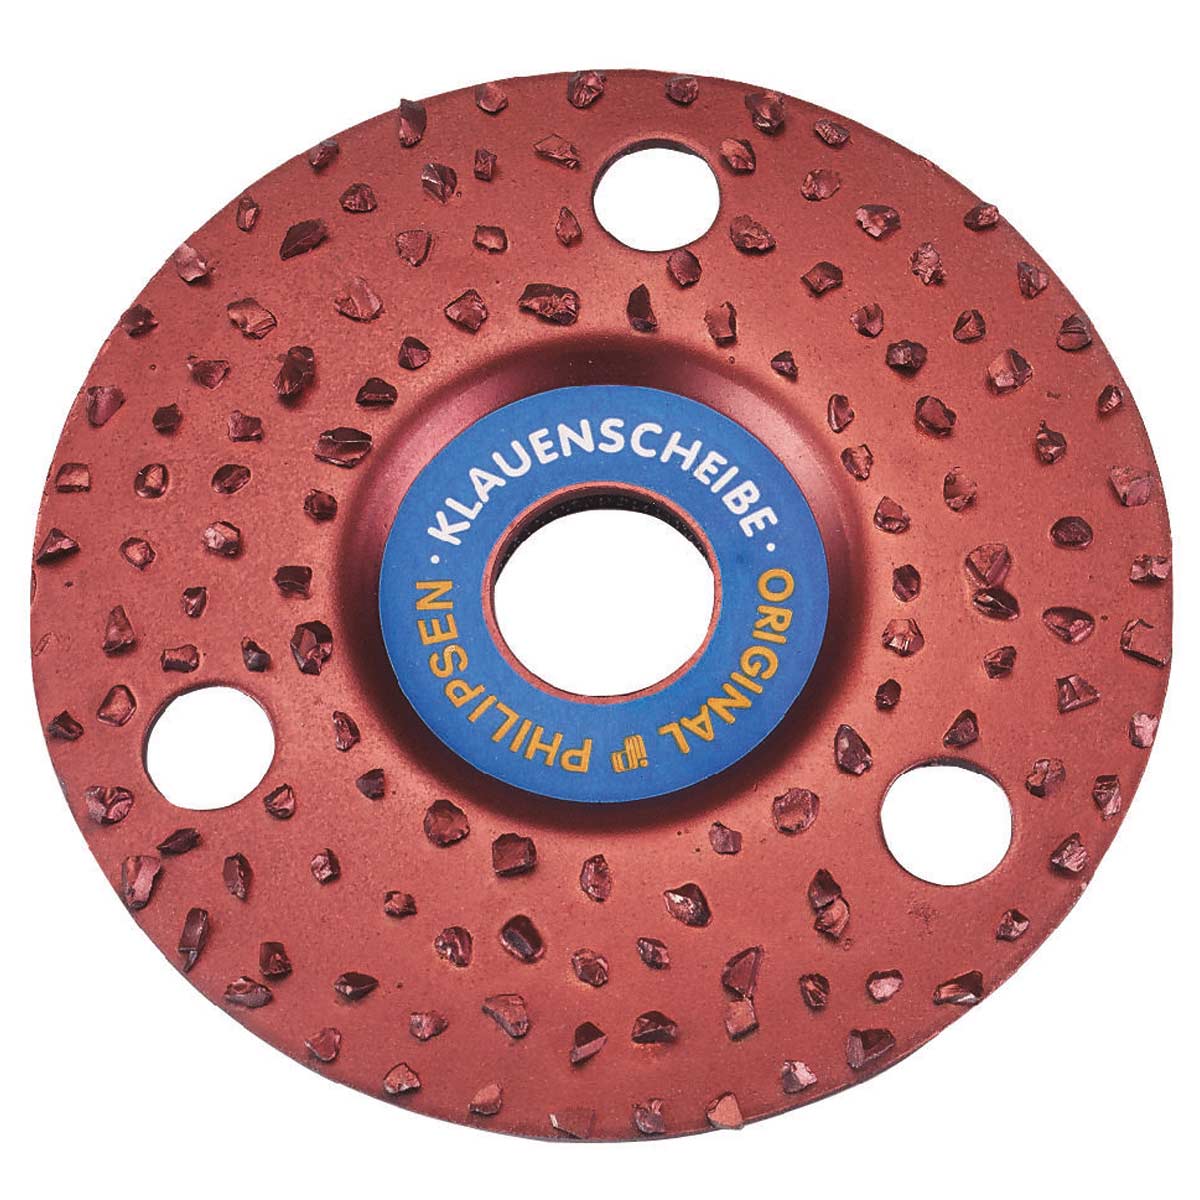 Super claw grinding wheel wide 115 mm